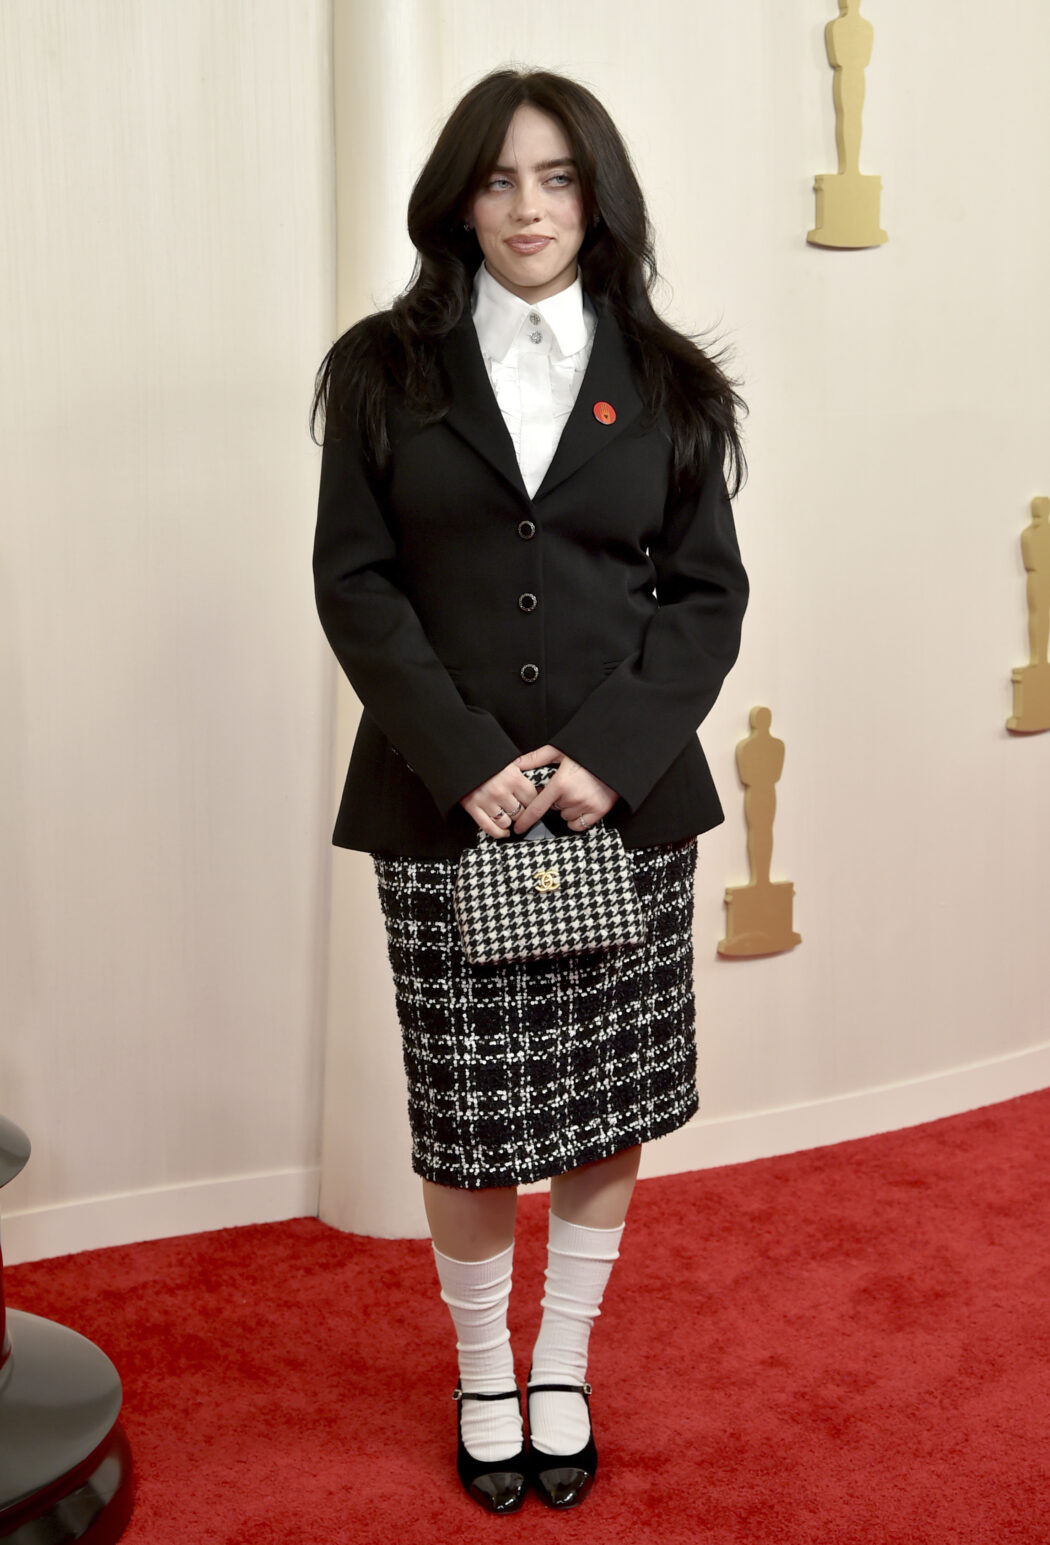 Billie Eilish arrives at the Oscars on Sunday, March 10, 2024, at the Dolby Theatre in Los Angeles. (Photo by Richard Shotwell/Invision/AP)

Associated Press/LaPresse
Only Italy and Spain